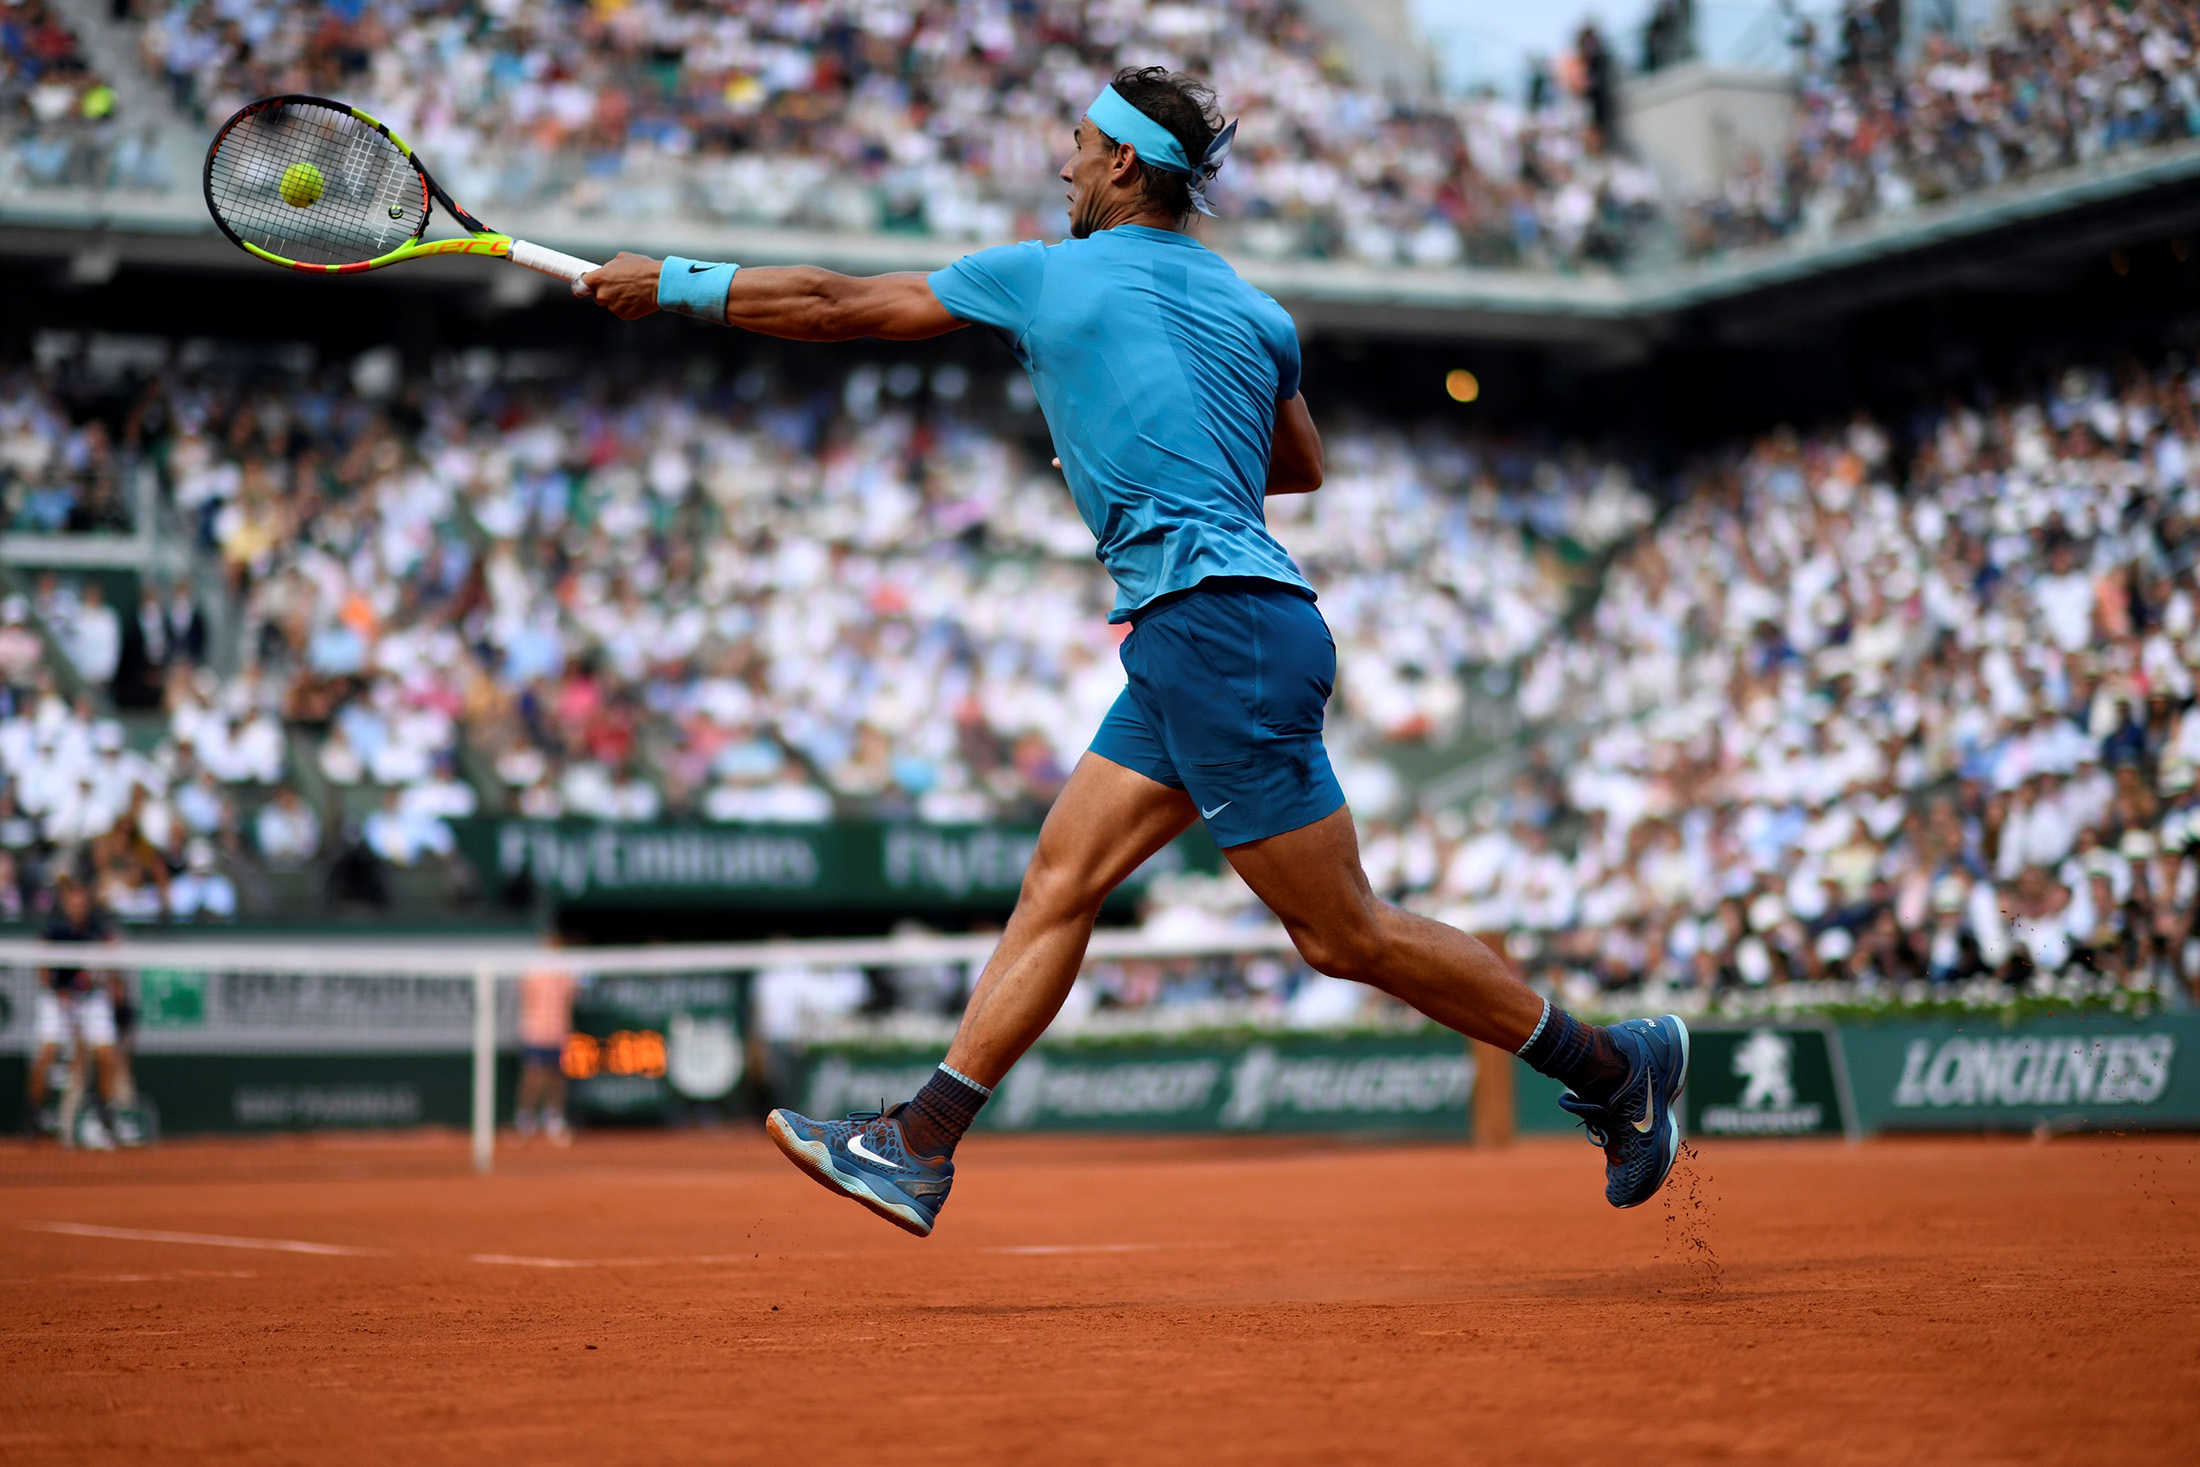 Spain's Rafael Nadal plays a forehand return to Austria's Dominic Thiem during their men's singles final match on day fifteen of The Roland Garros 2018 French Open tennis tournament in Paris on June 10, 2018. (